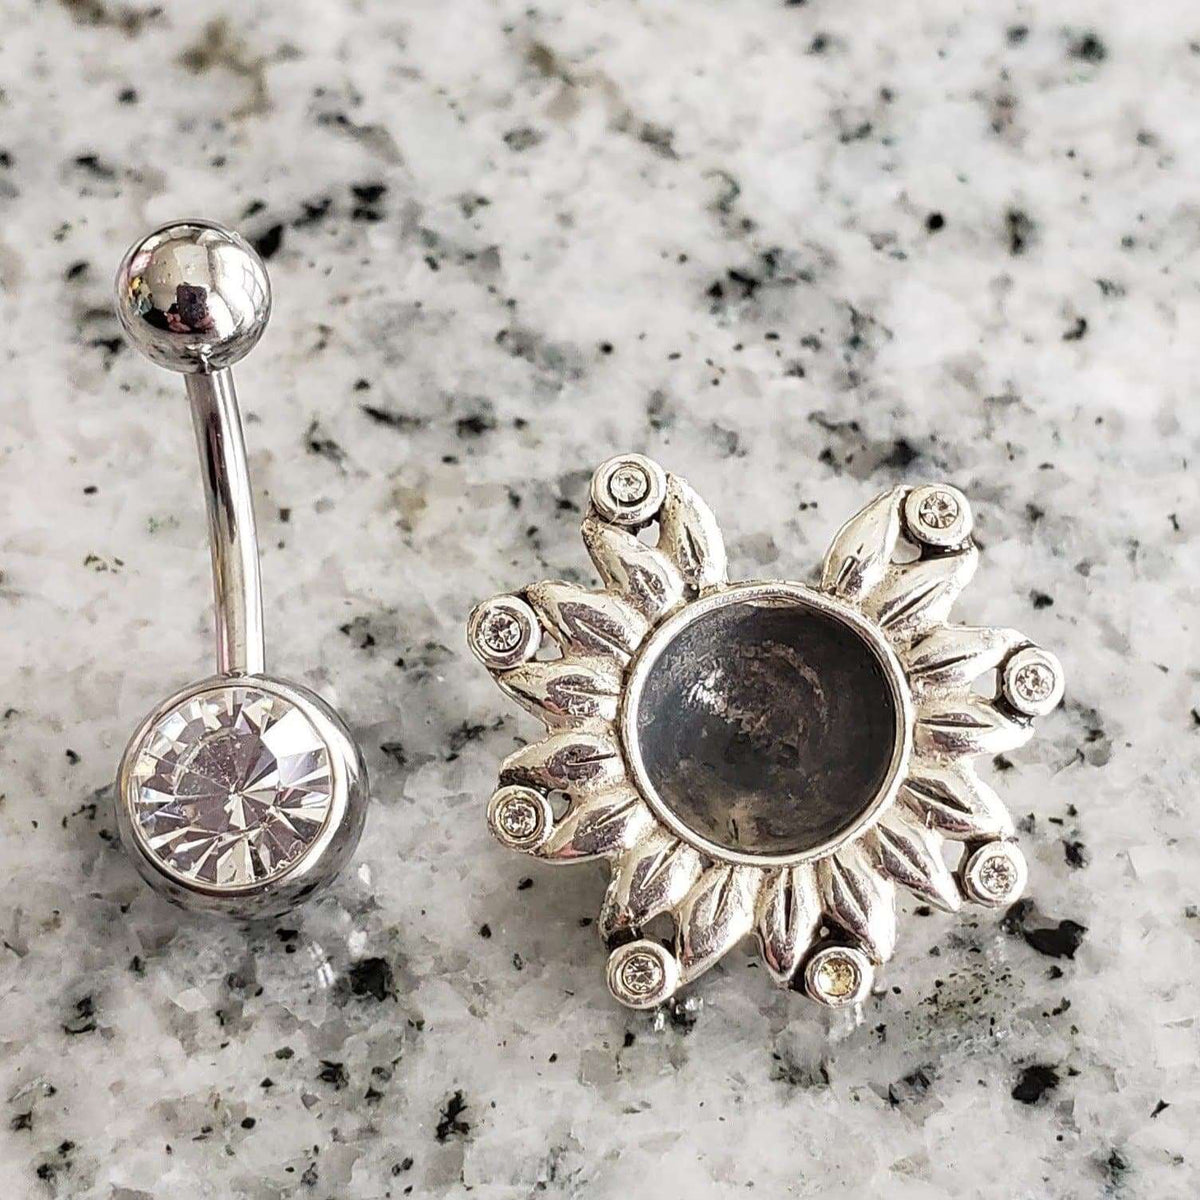 Flower Belly Ring with Navel Shield | Surgical Steel and 925 Silver | White Sapphire Crystal